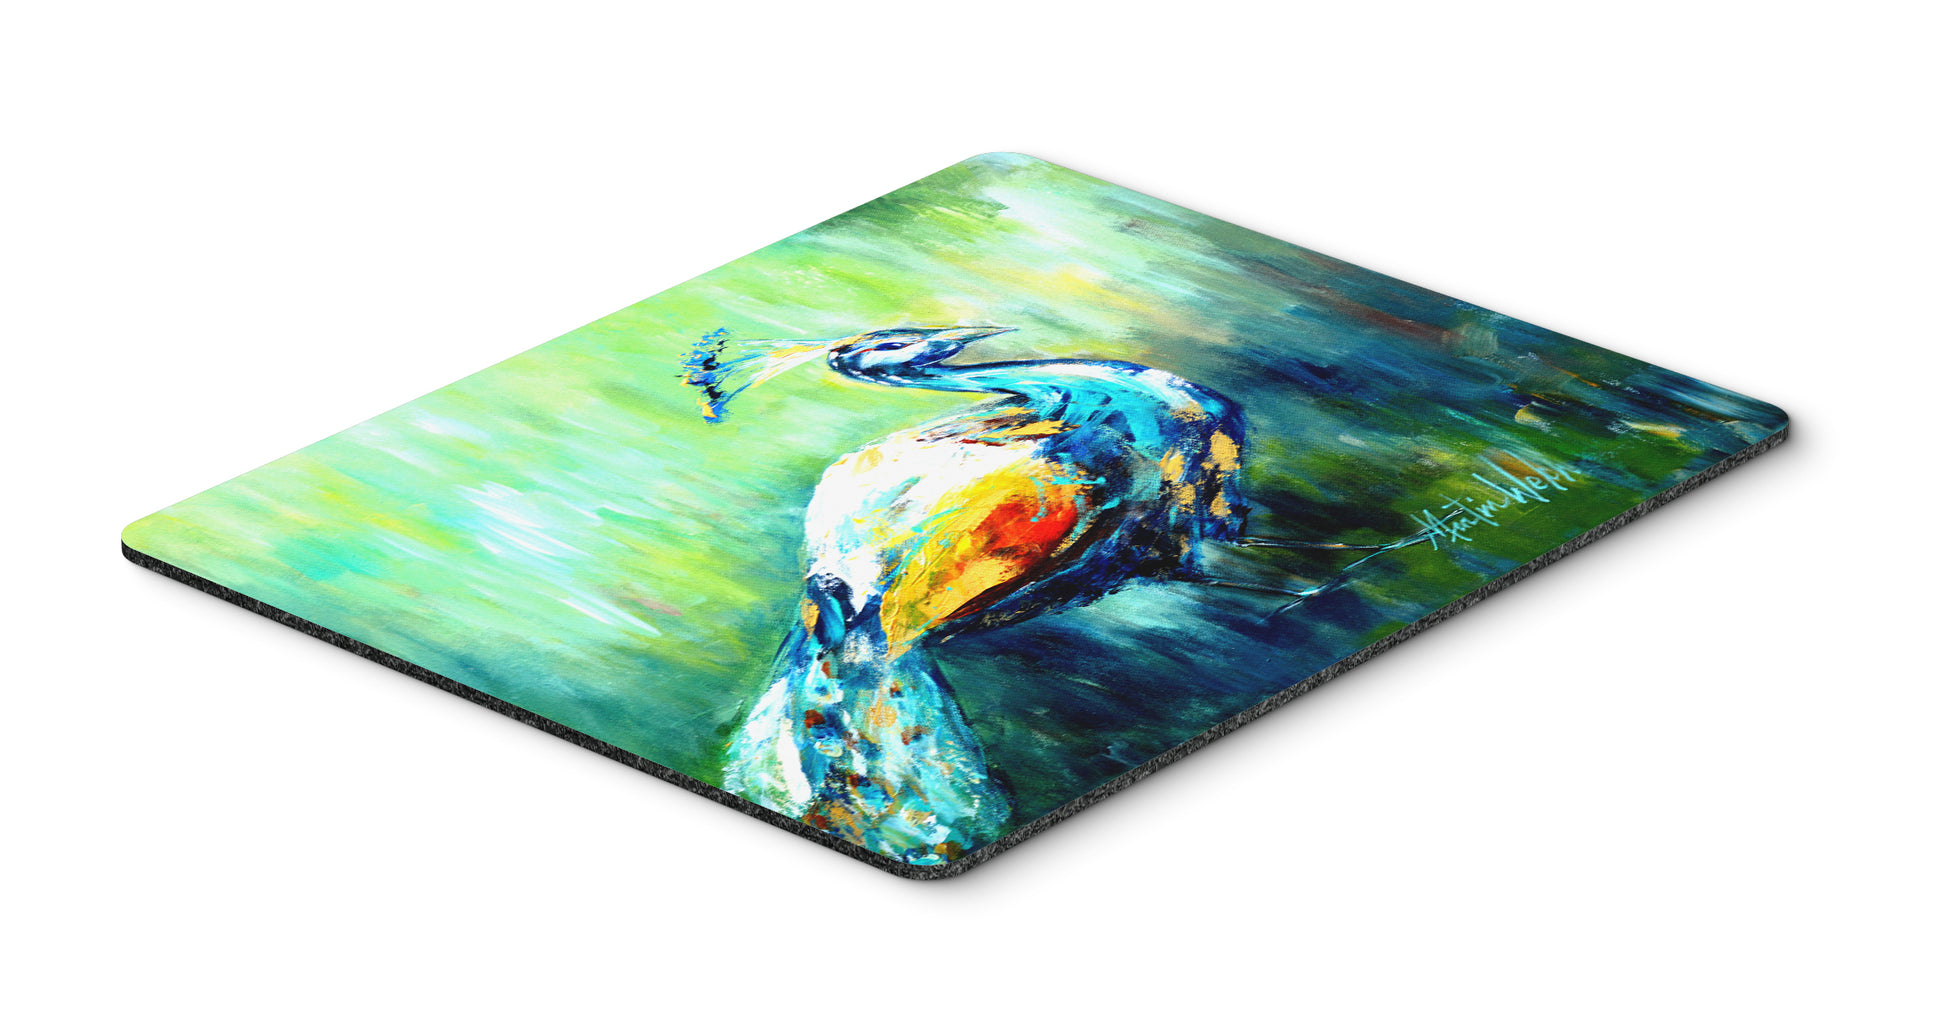 Buy this Proud Peacock Green Mouse Pad, Hot Pad or Trivet